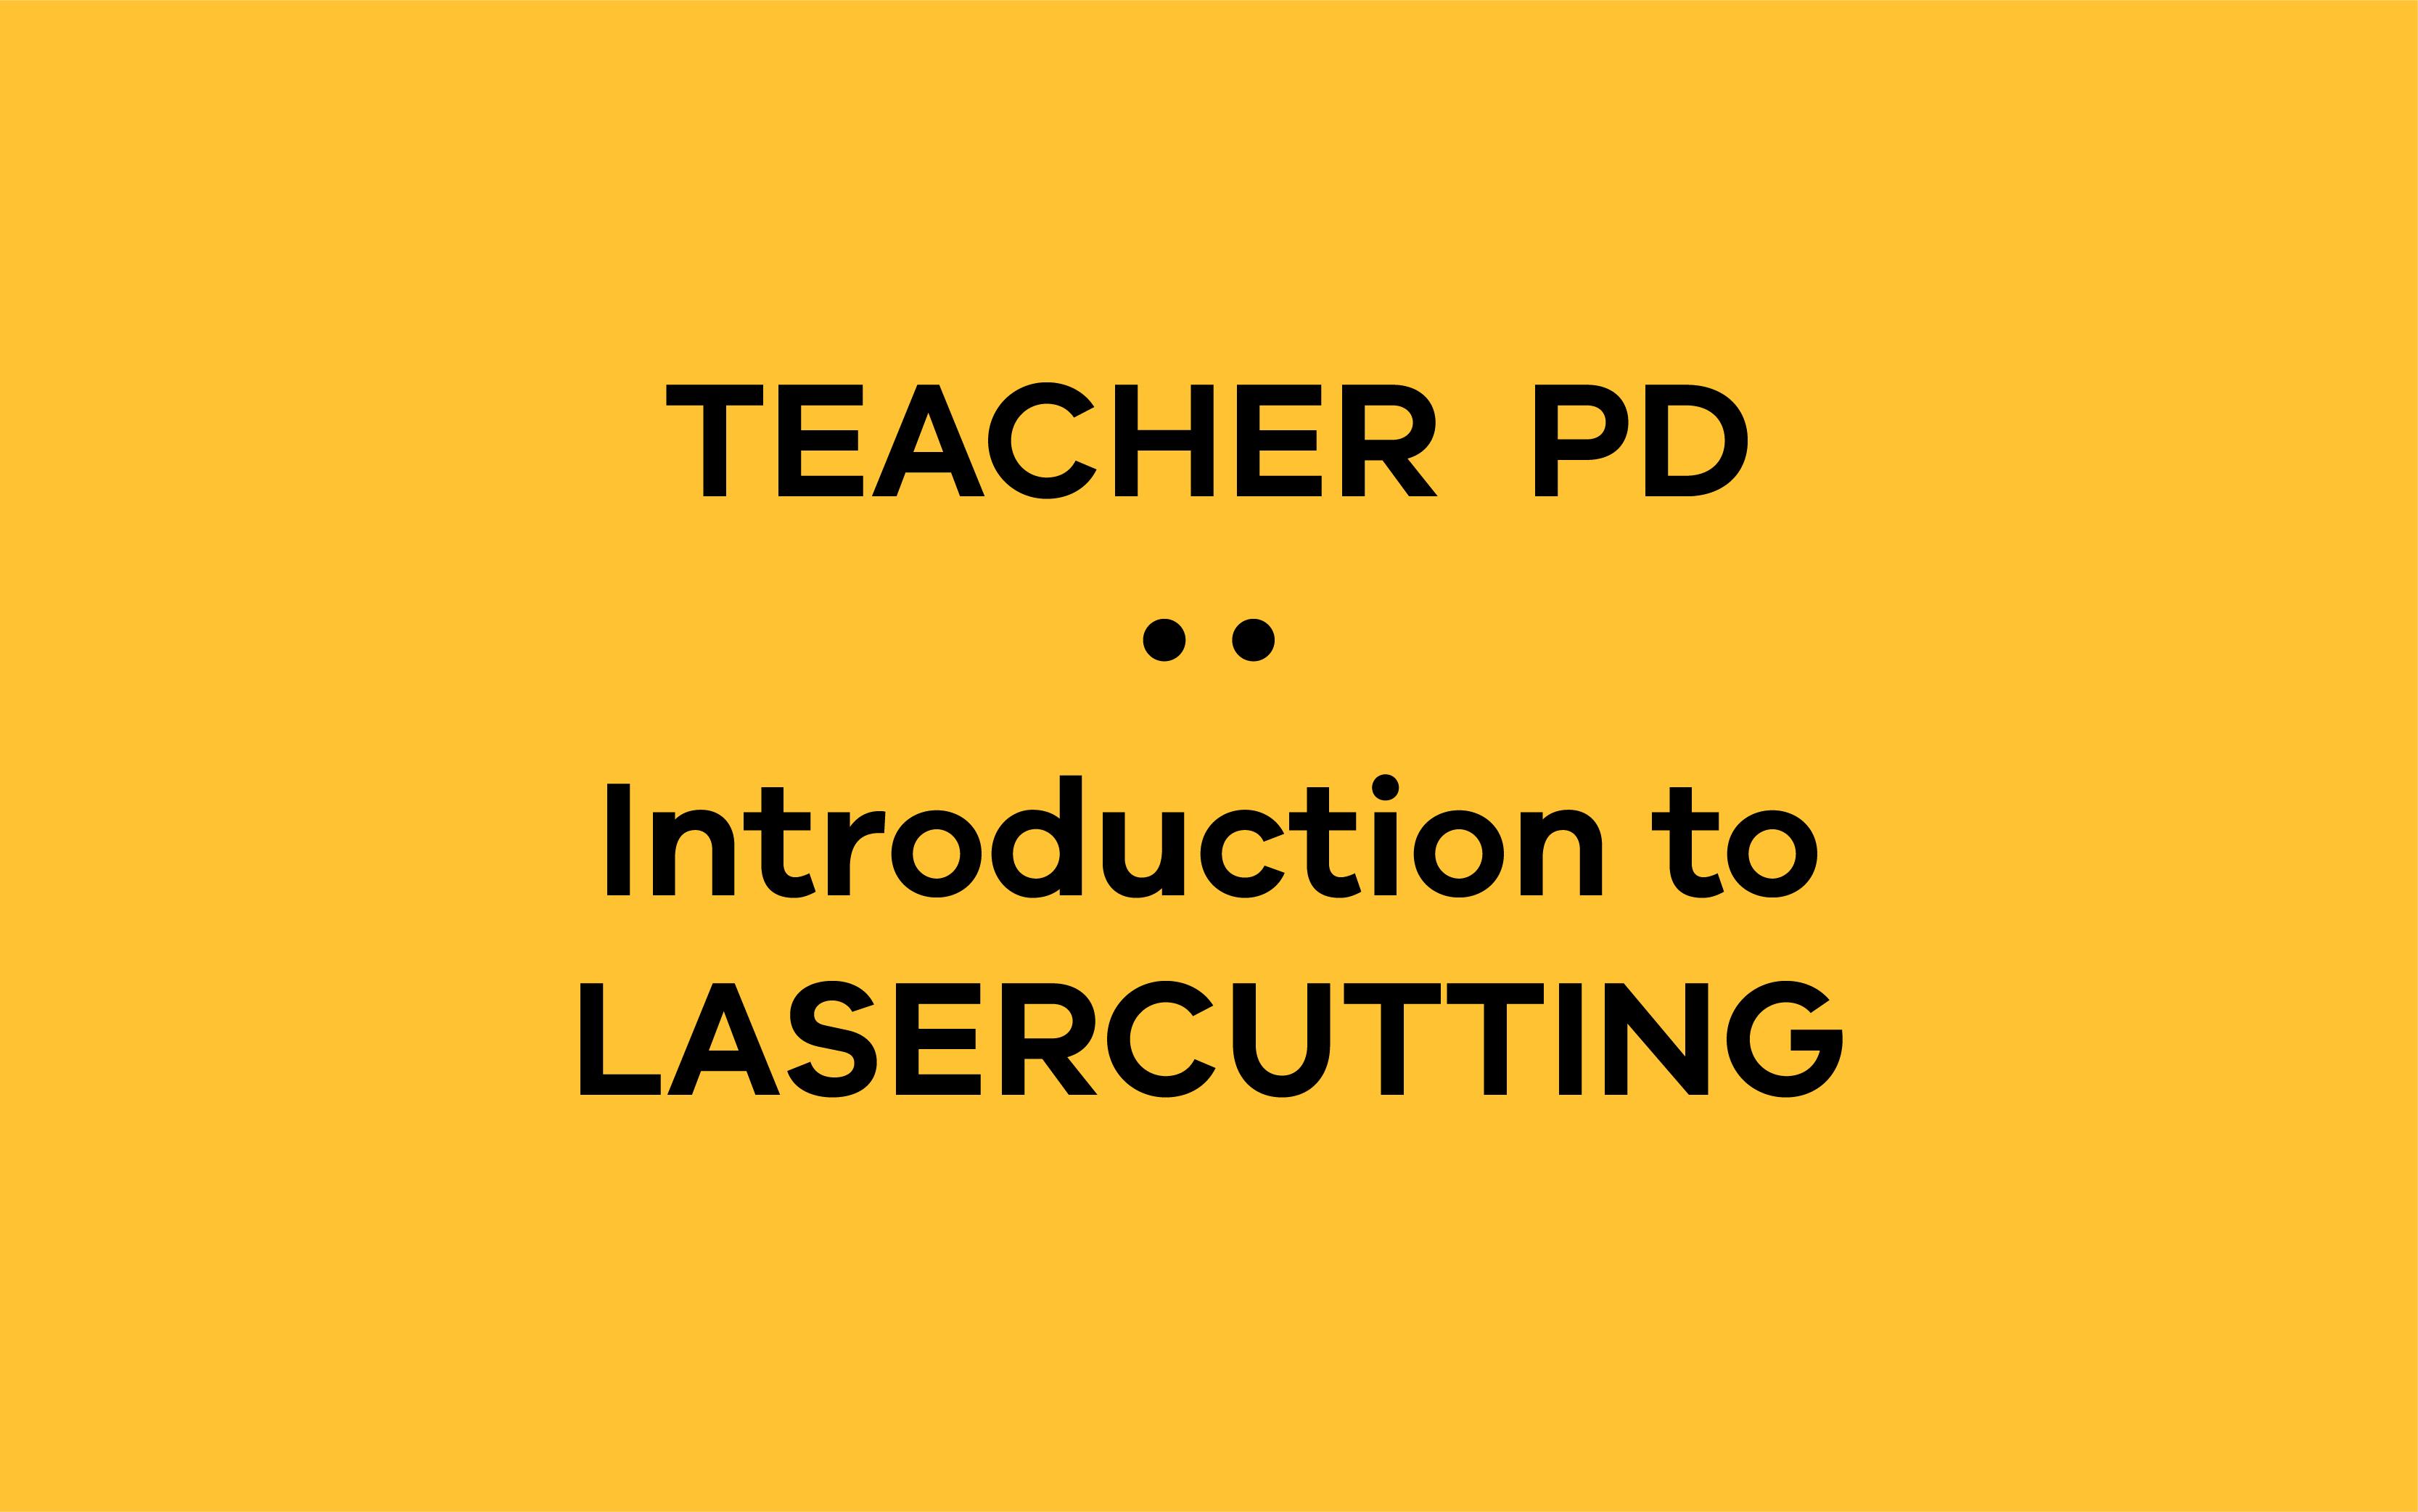 2021 - Introduction to: Lasercutting